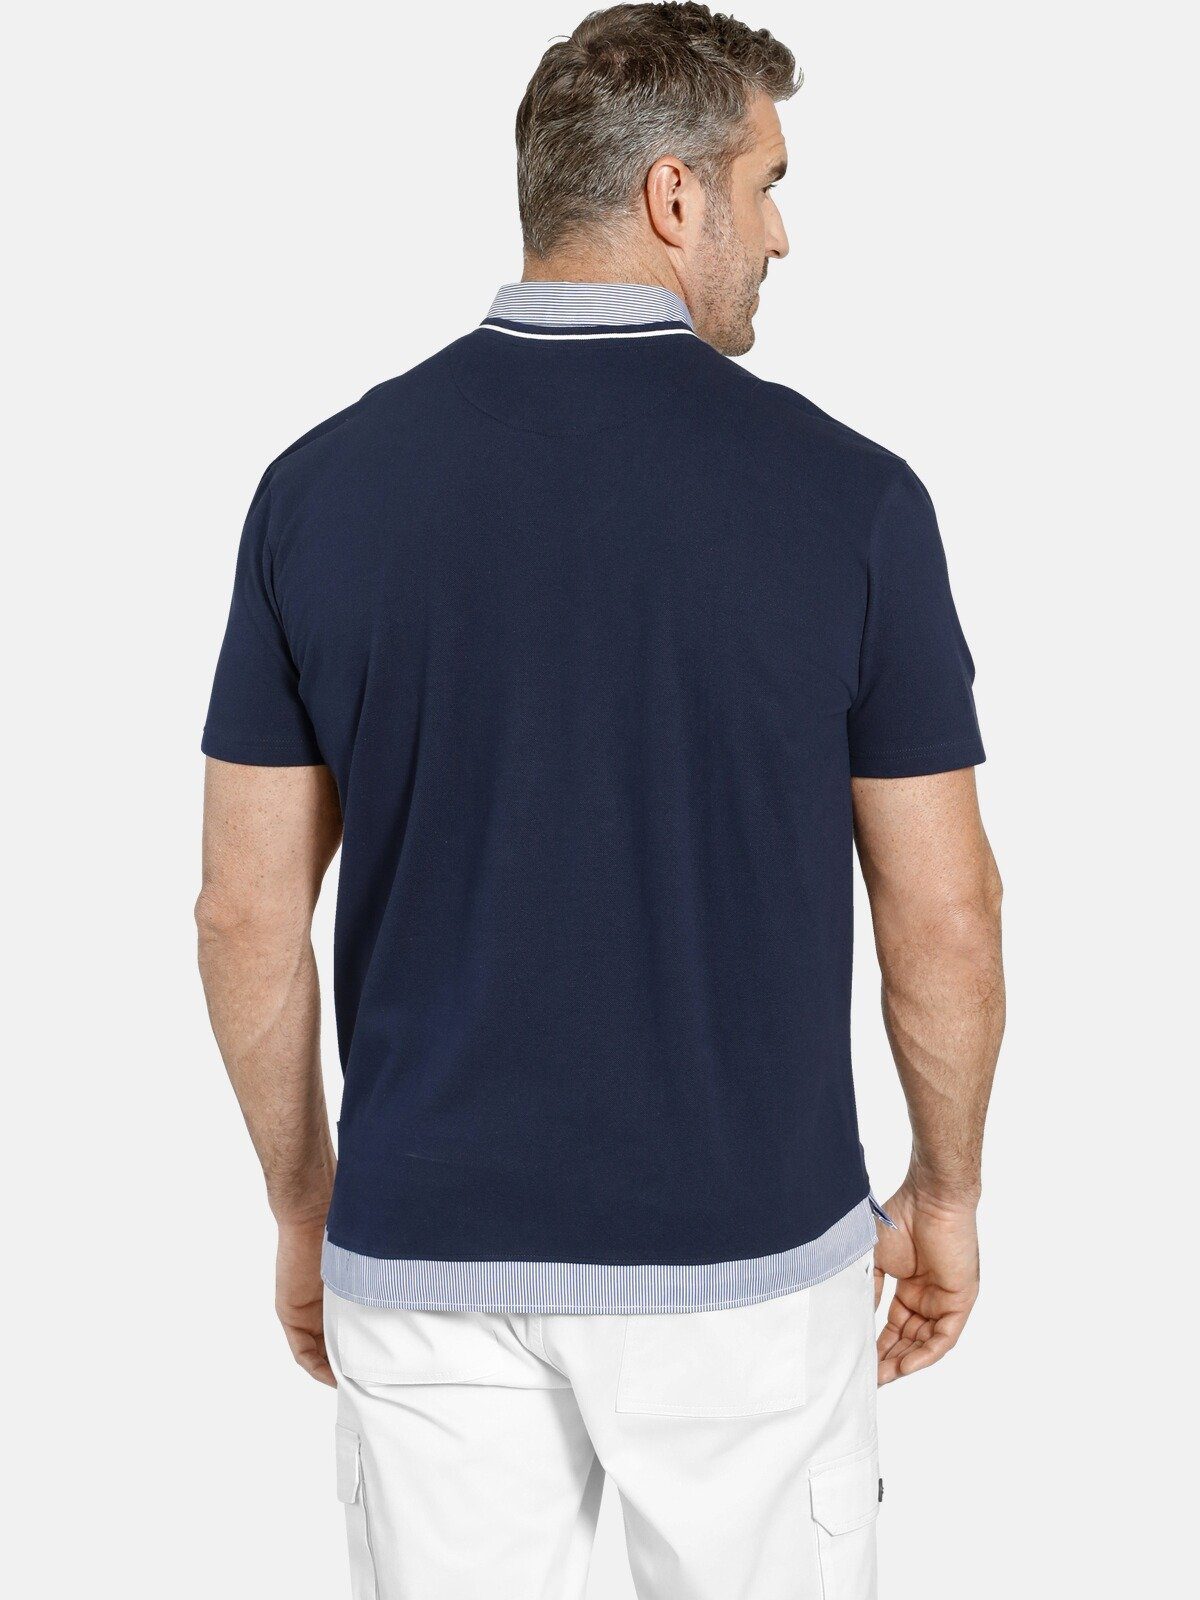 WILLERS EARL Poloshirt mit Charles Colby Business-Kragen